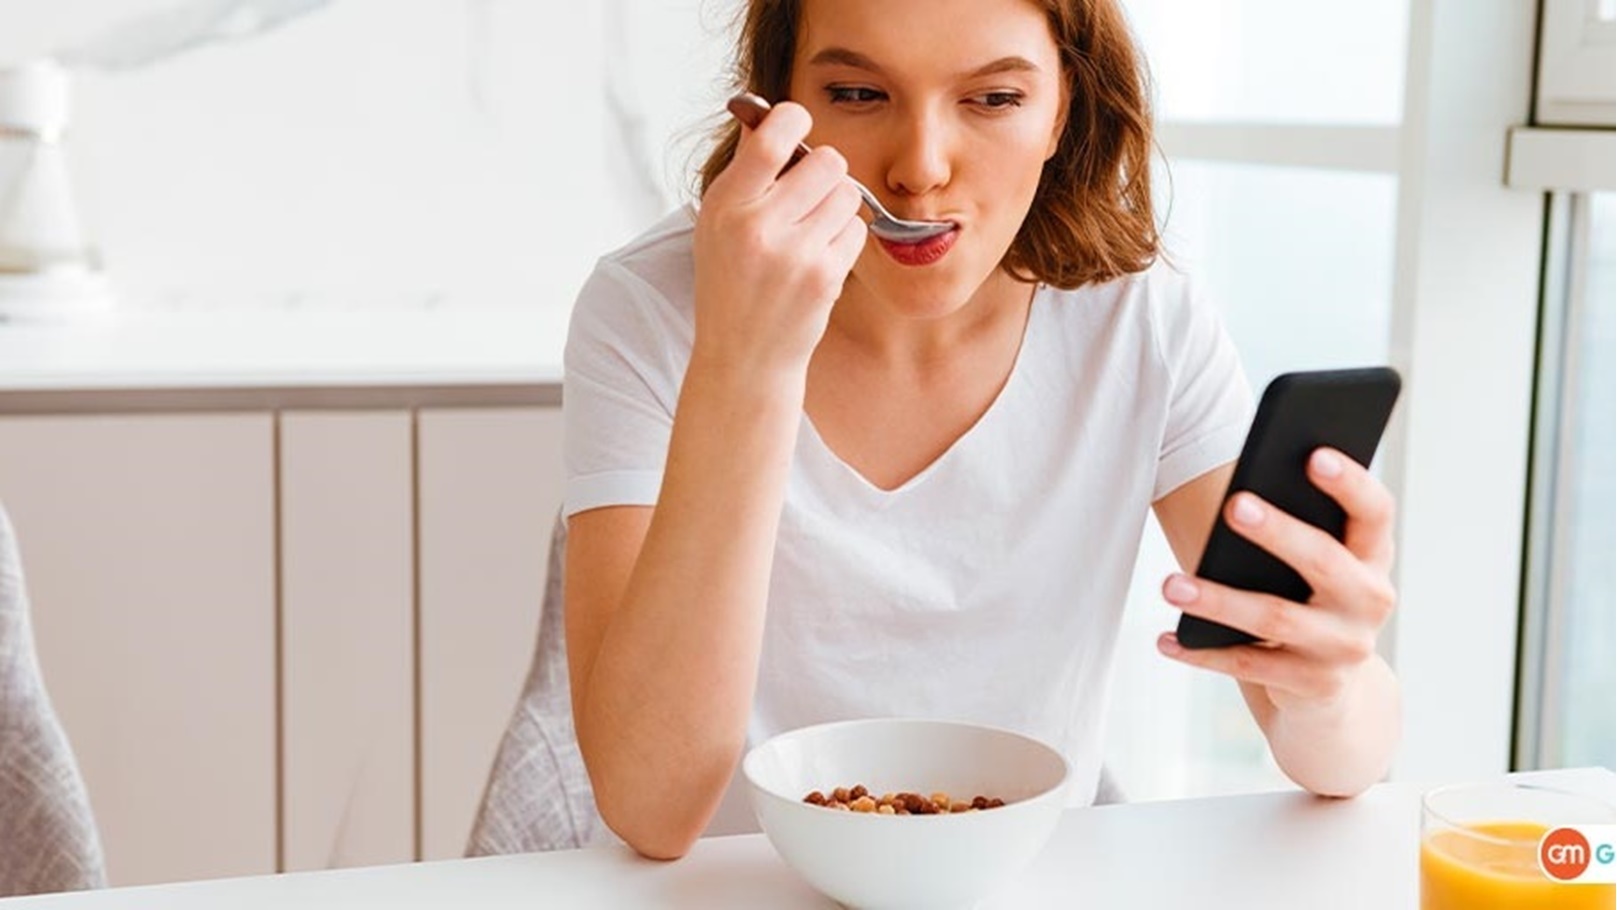 7-Extreme-bad-side-effects-of-using-phone-while-eating